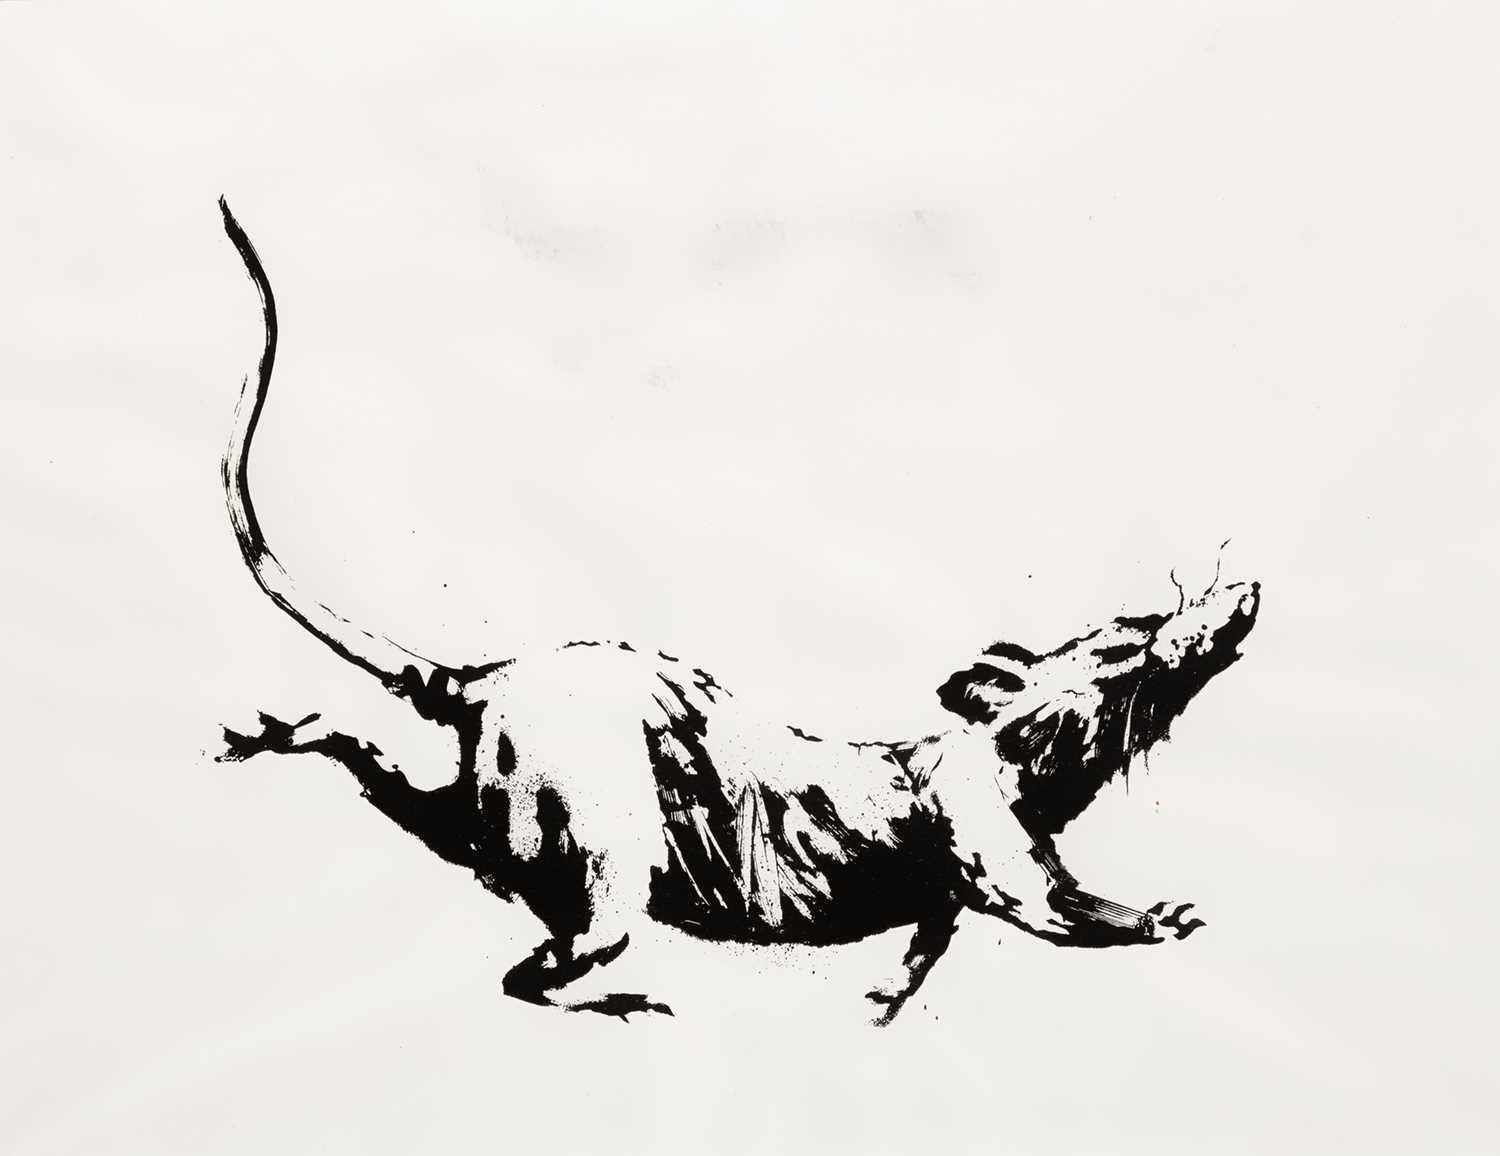 Banksy, GDP Rat, 2019

Screen print on 50gsm paper

38.5 x 50.5 cm (15.3 x 19.6 in)

Handed out at random times at GrossDomesticProduct show in Croydon. Exact number unknown but these are rare.

Condition: Very good, the paper has naturally